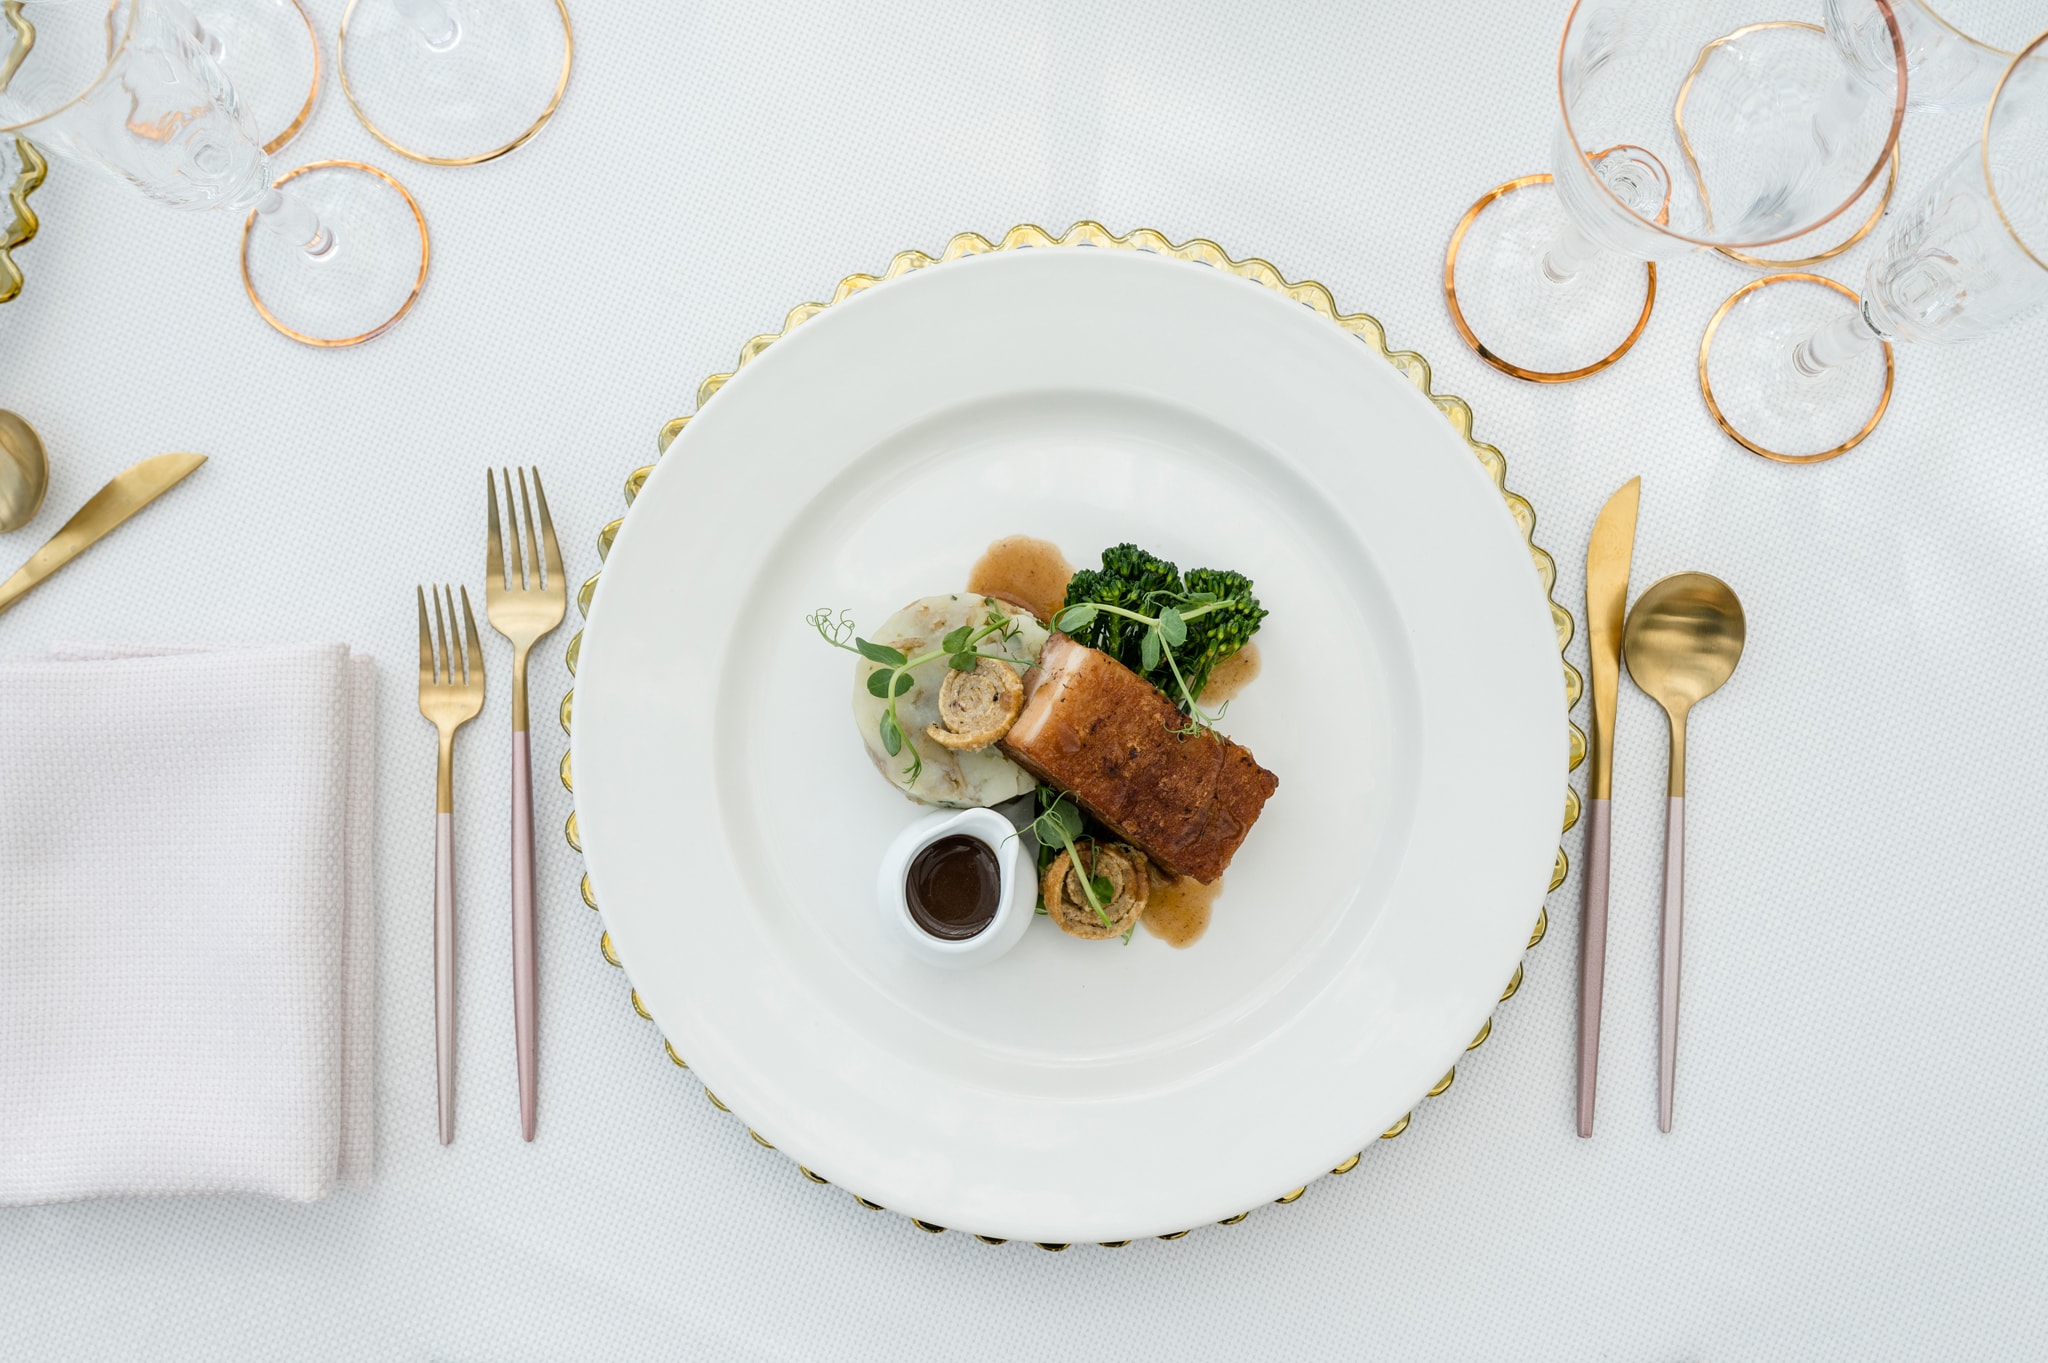 Pork belly wedding breakfast main course served on a white plate and gold scallop edge charger with frosted pink cutlery